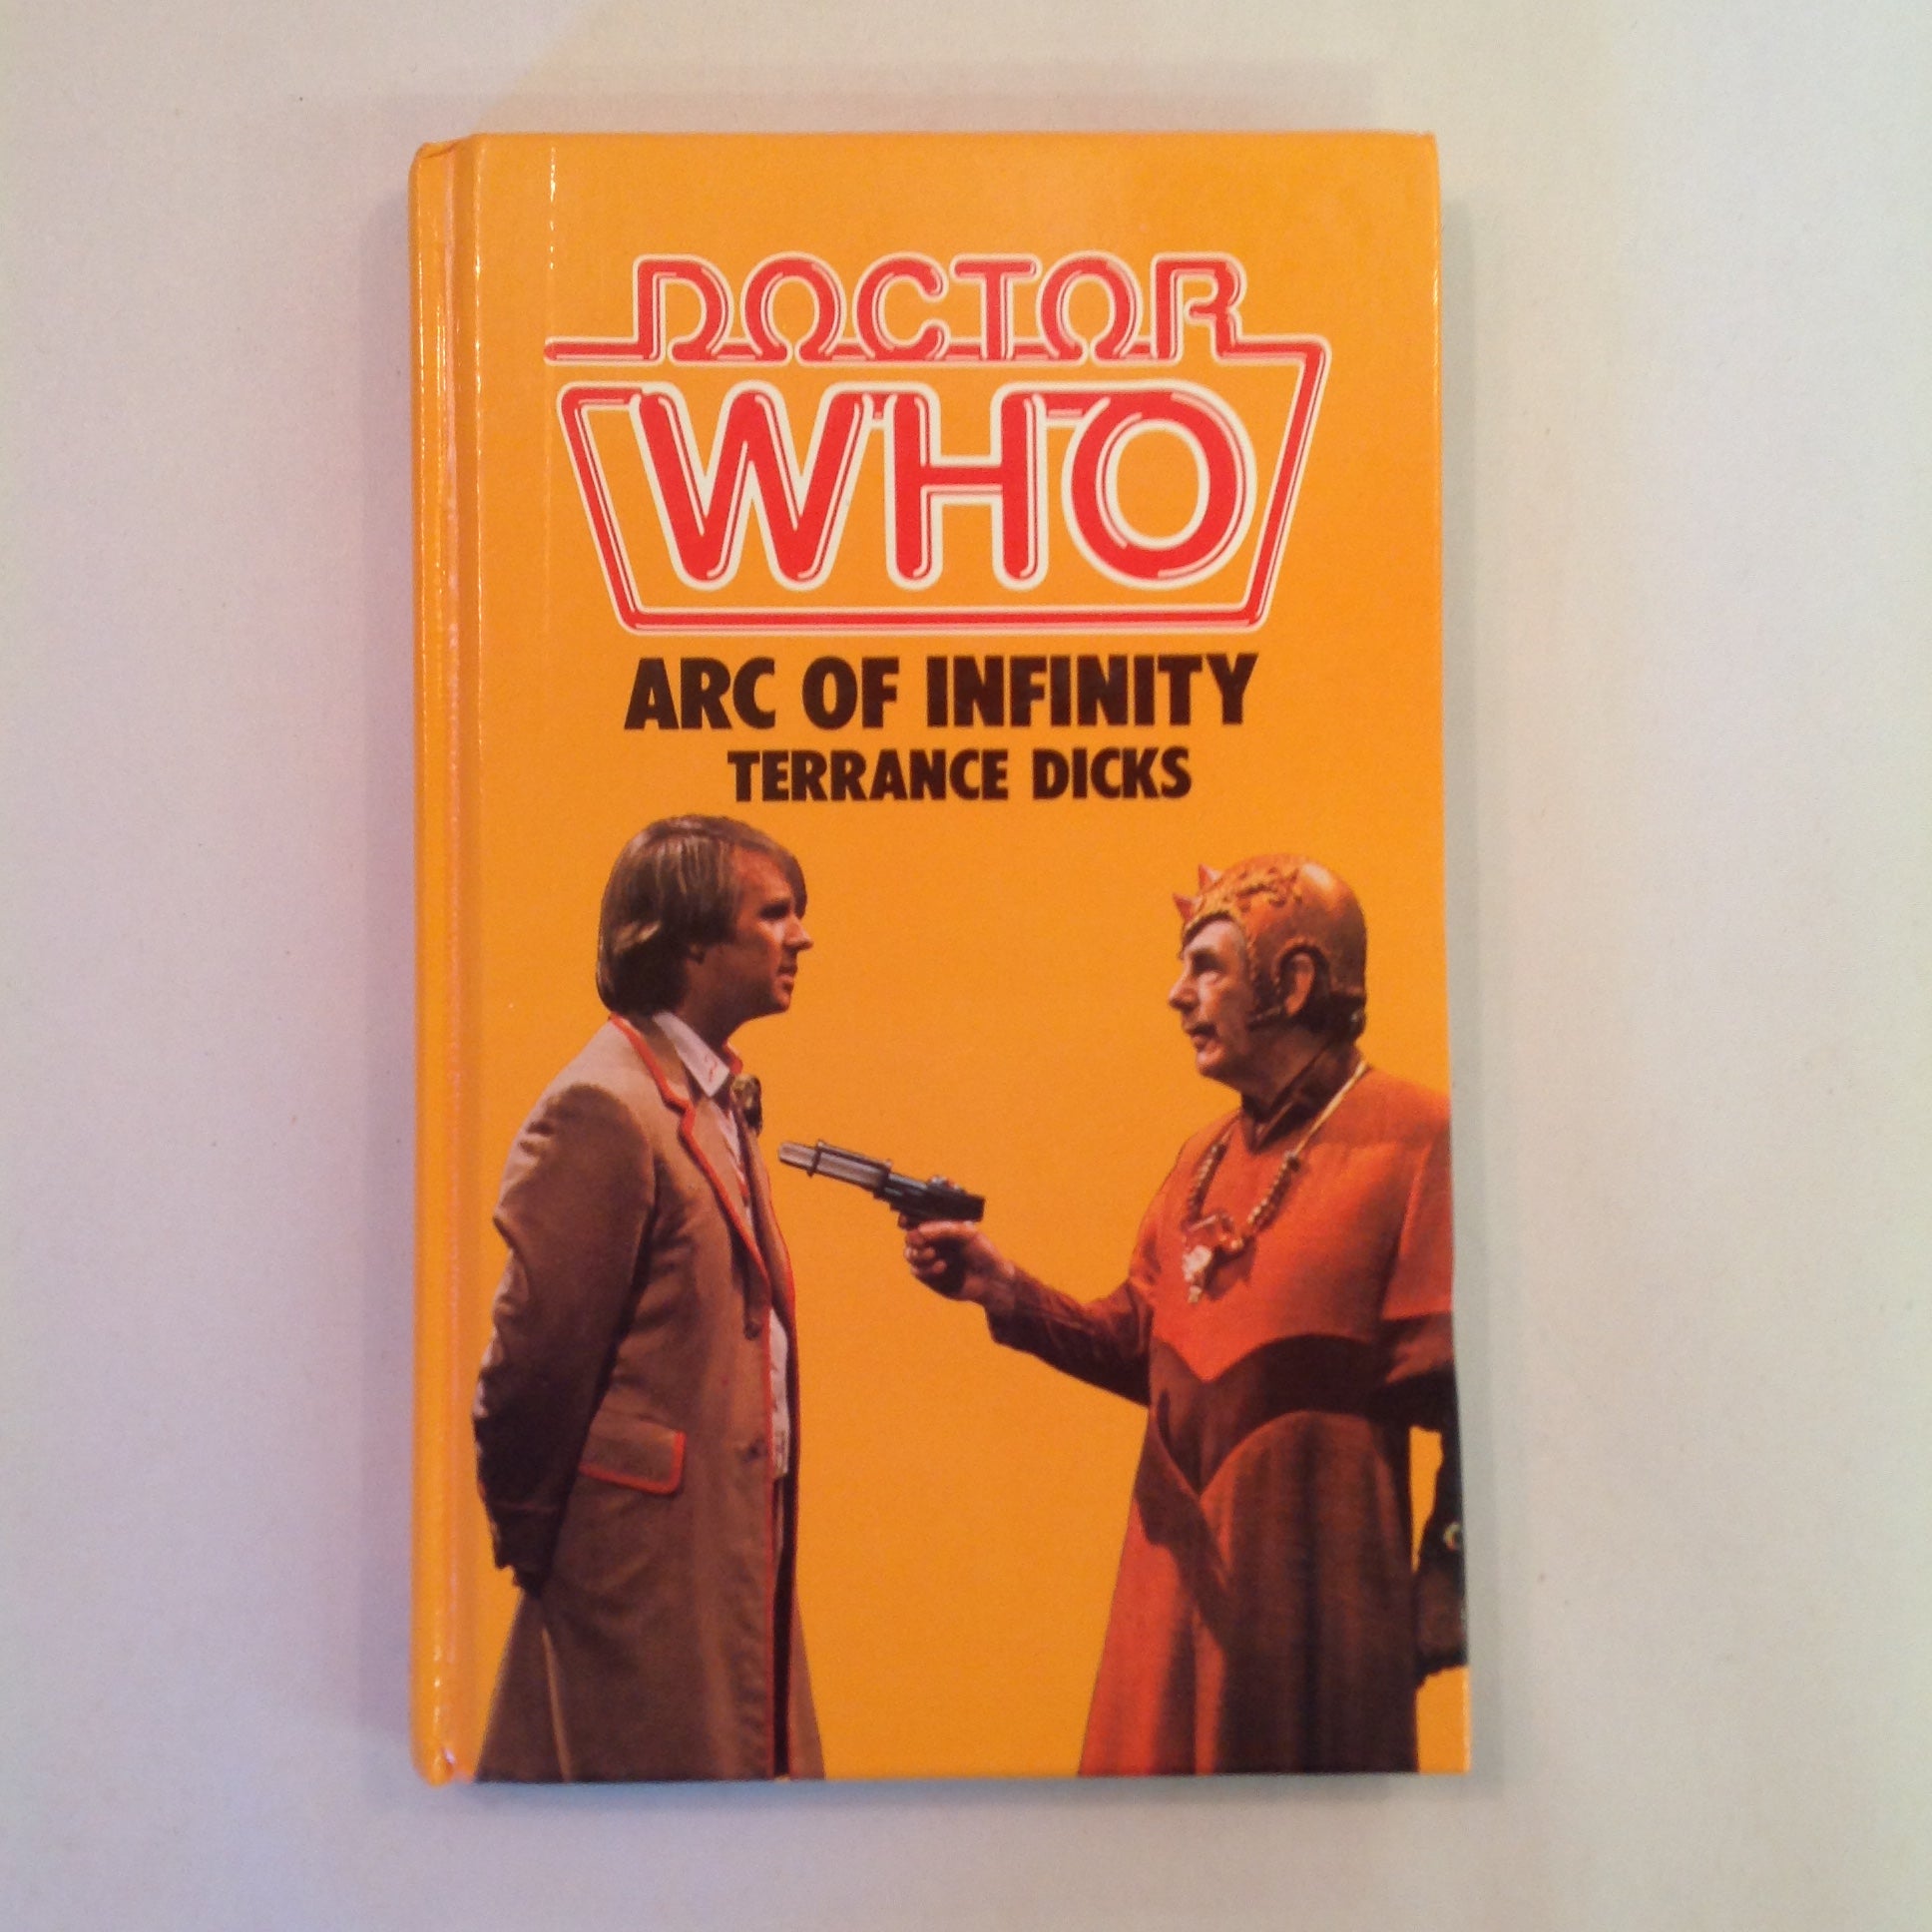 Vintage 1983 Hardcover Doctor Who: Arc of Infinity Terrance Dicks